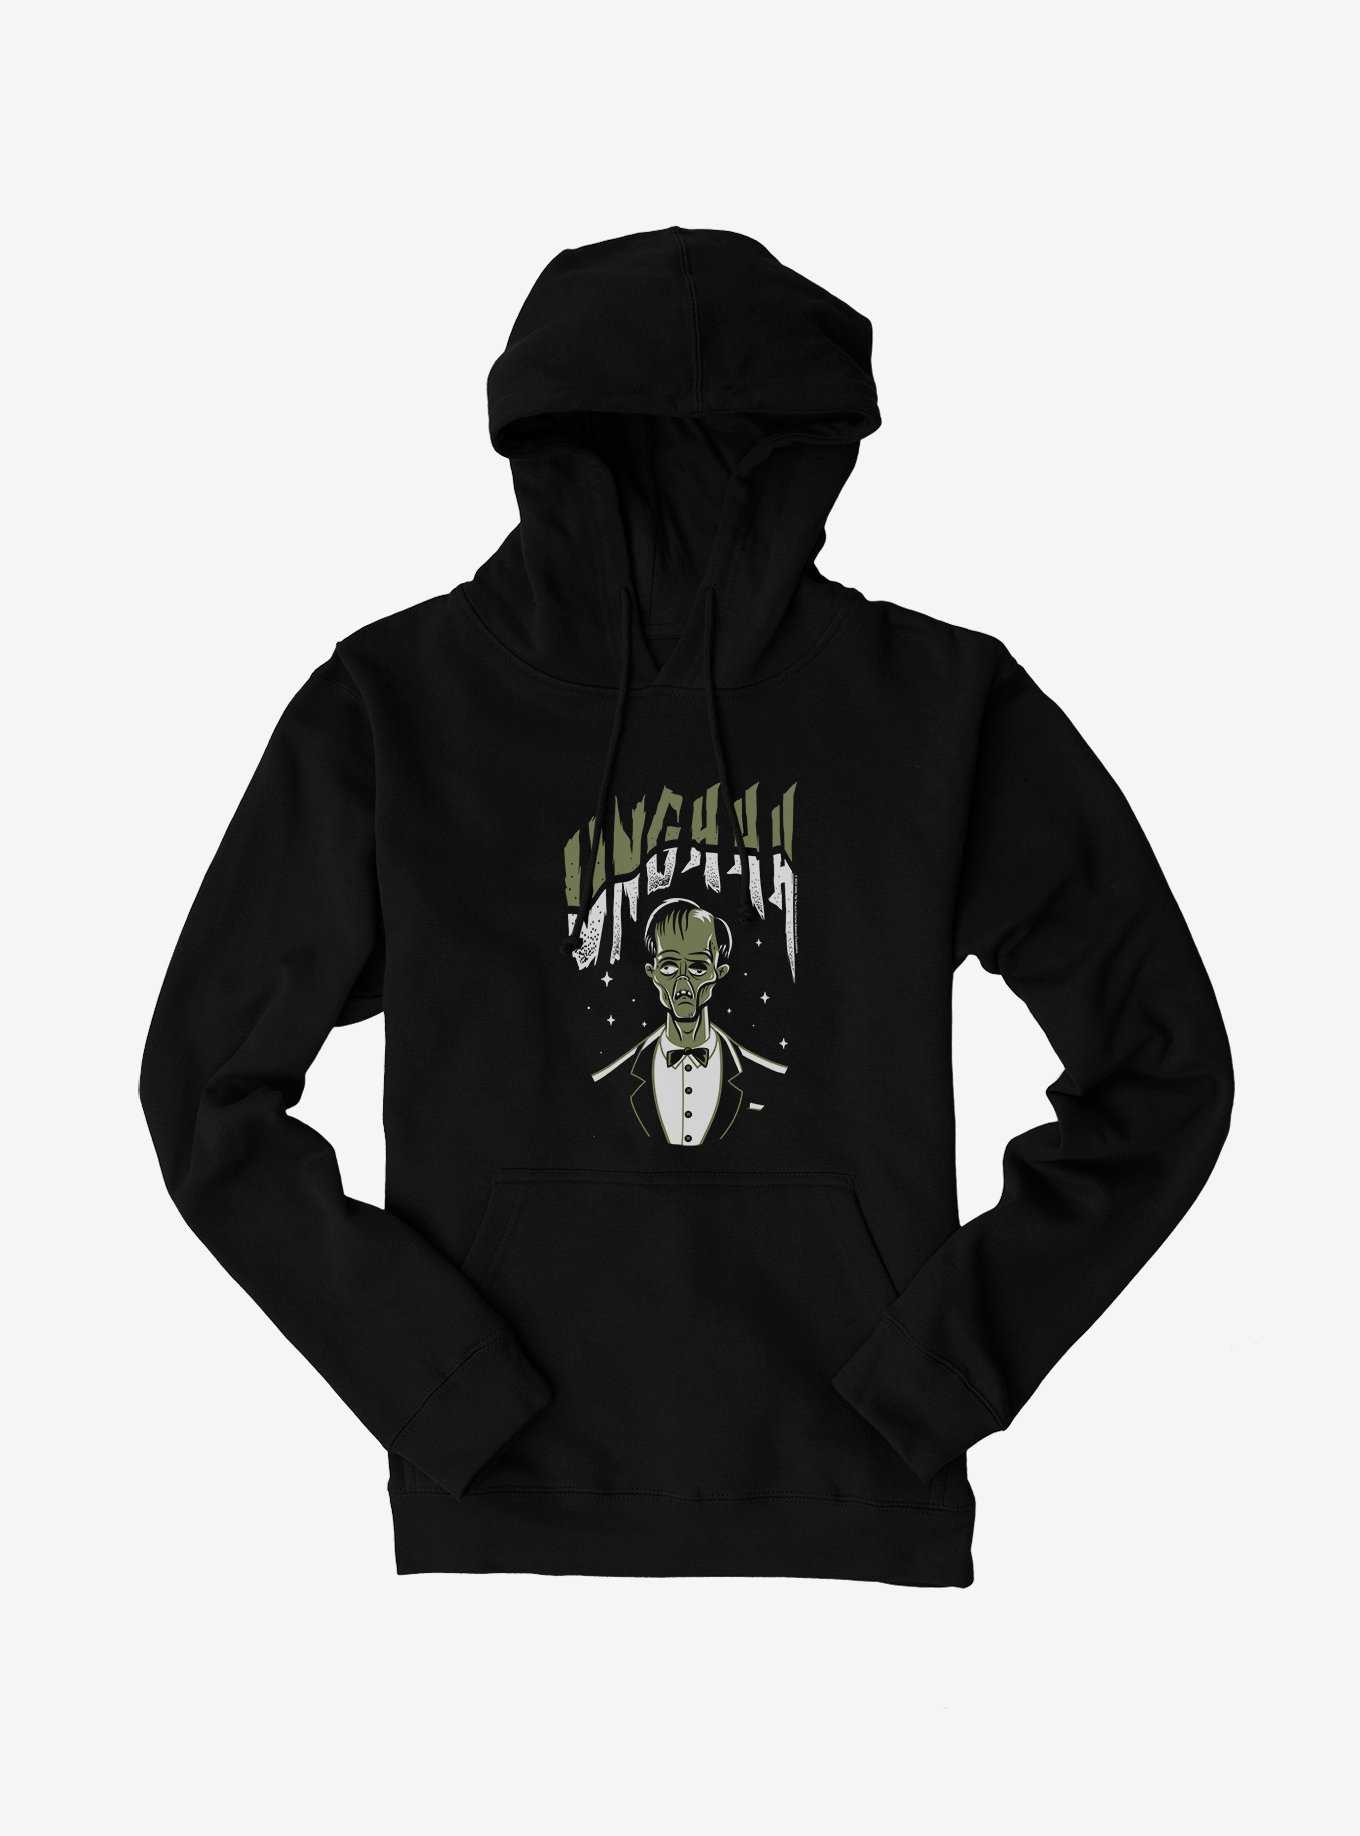 The Addams Family Caricature Lurch Unghhh Hoodie, , hi-res